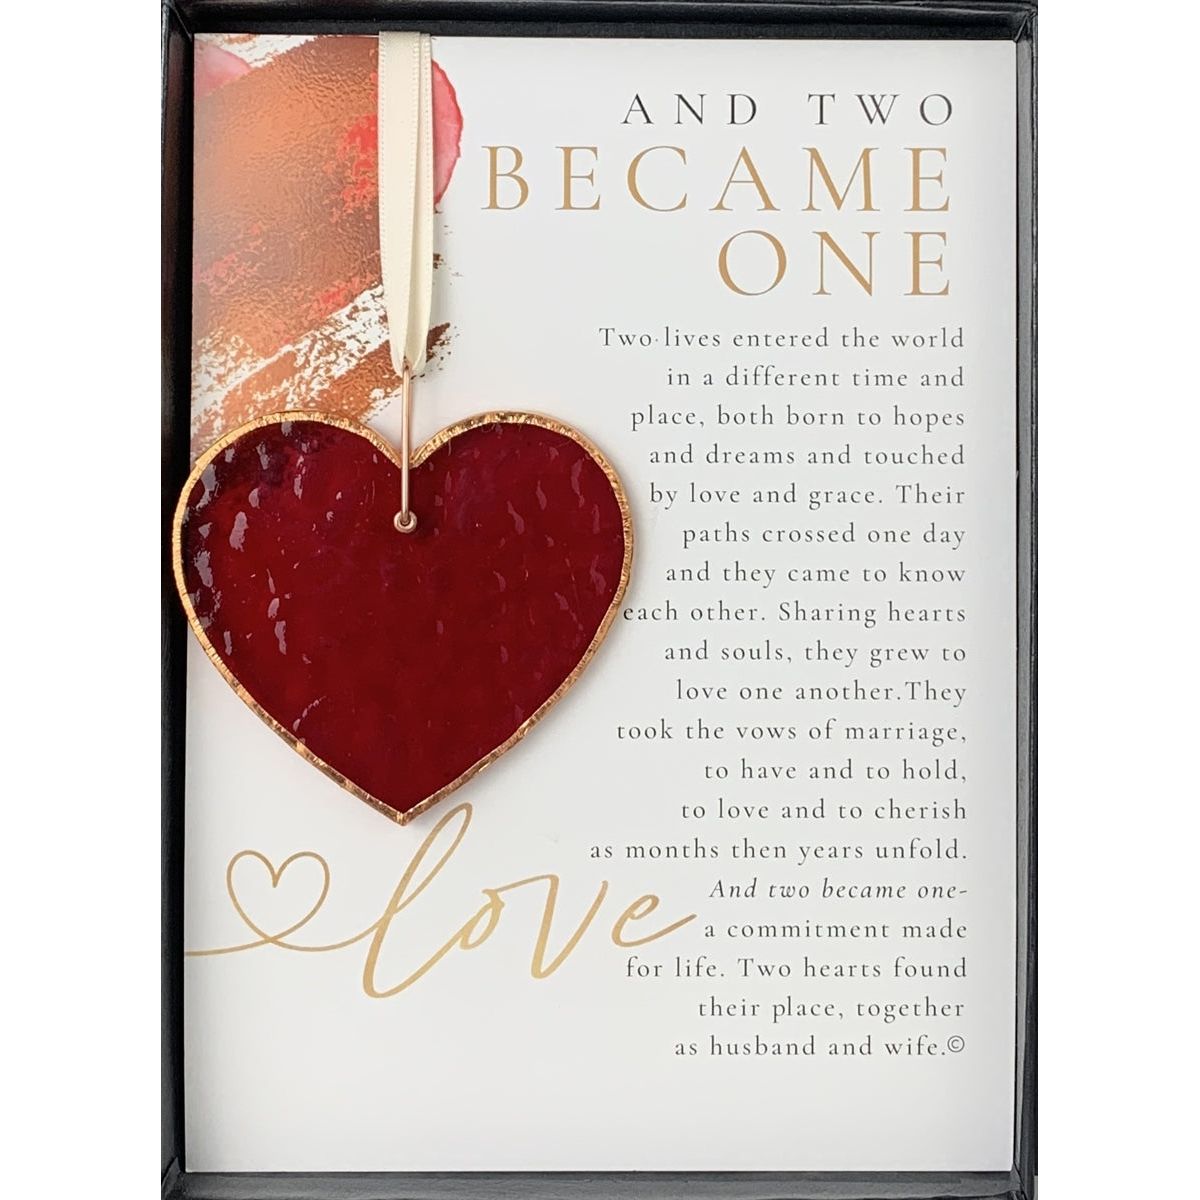 Wedding Gift - Stained Glass Red Heart Edged with Copper and Packaged with "And Two Became One" Sentiment in Black Box with Clear Lid